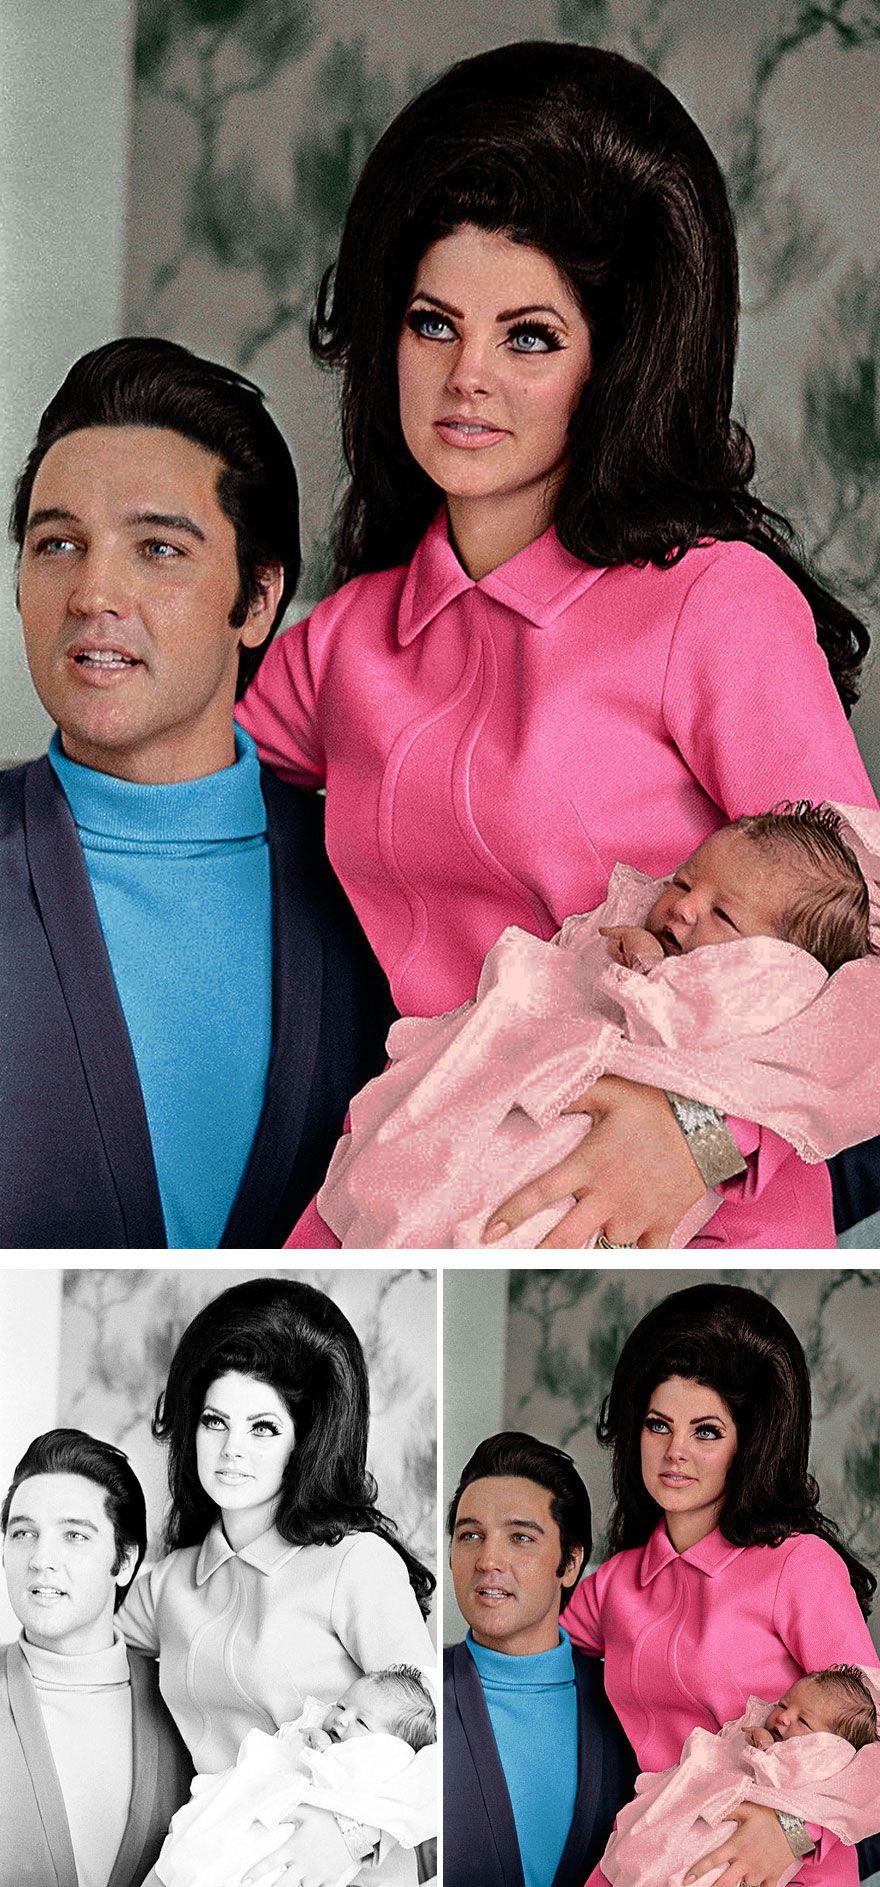 7. Elvis and Priscilla Presley with baby Lisa Marie